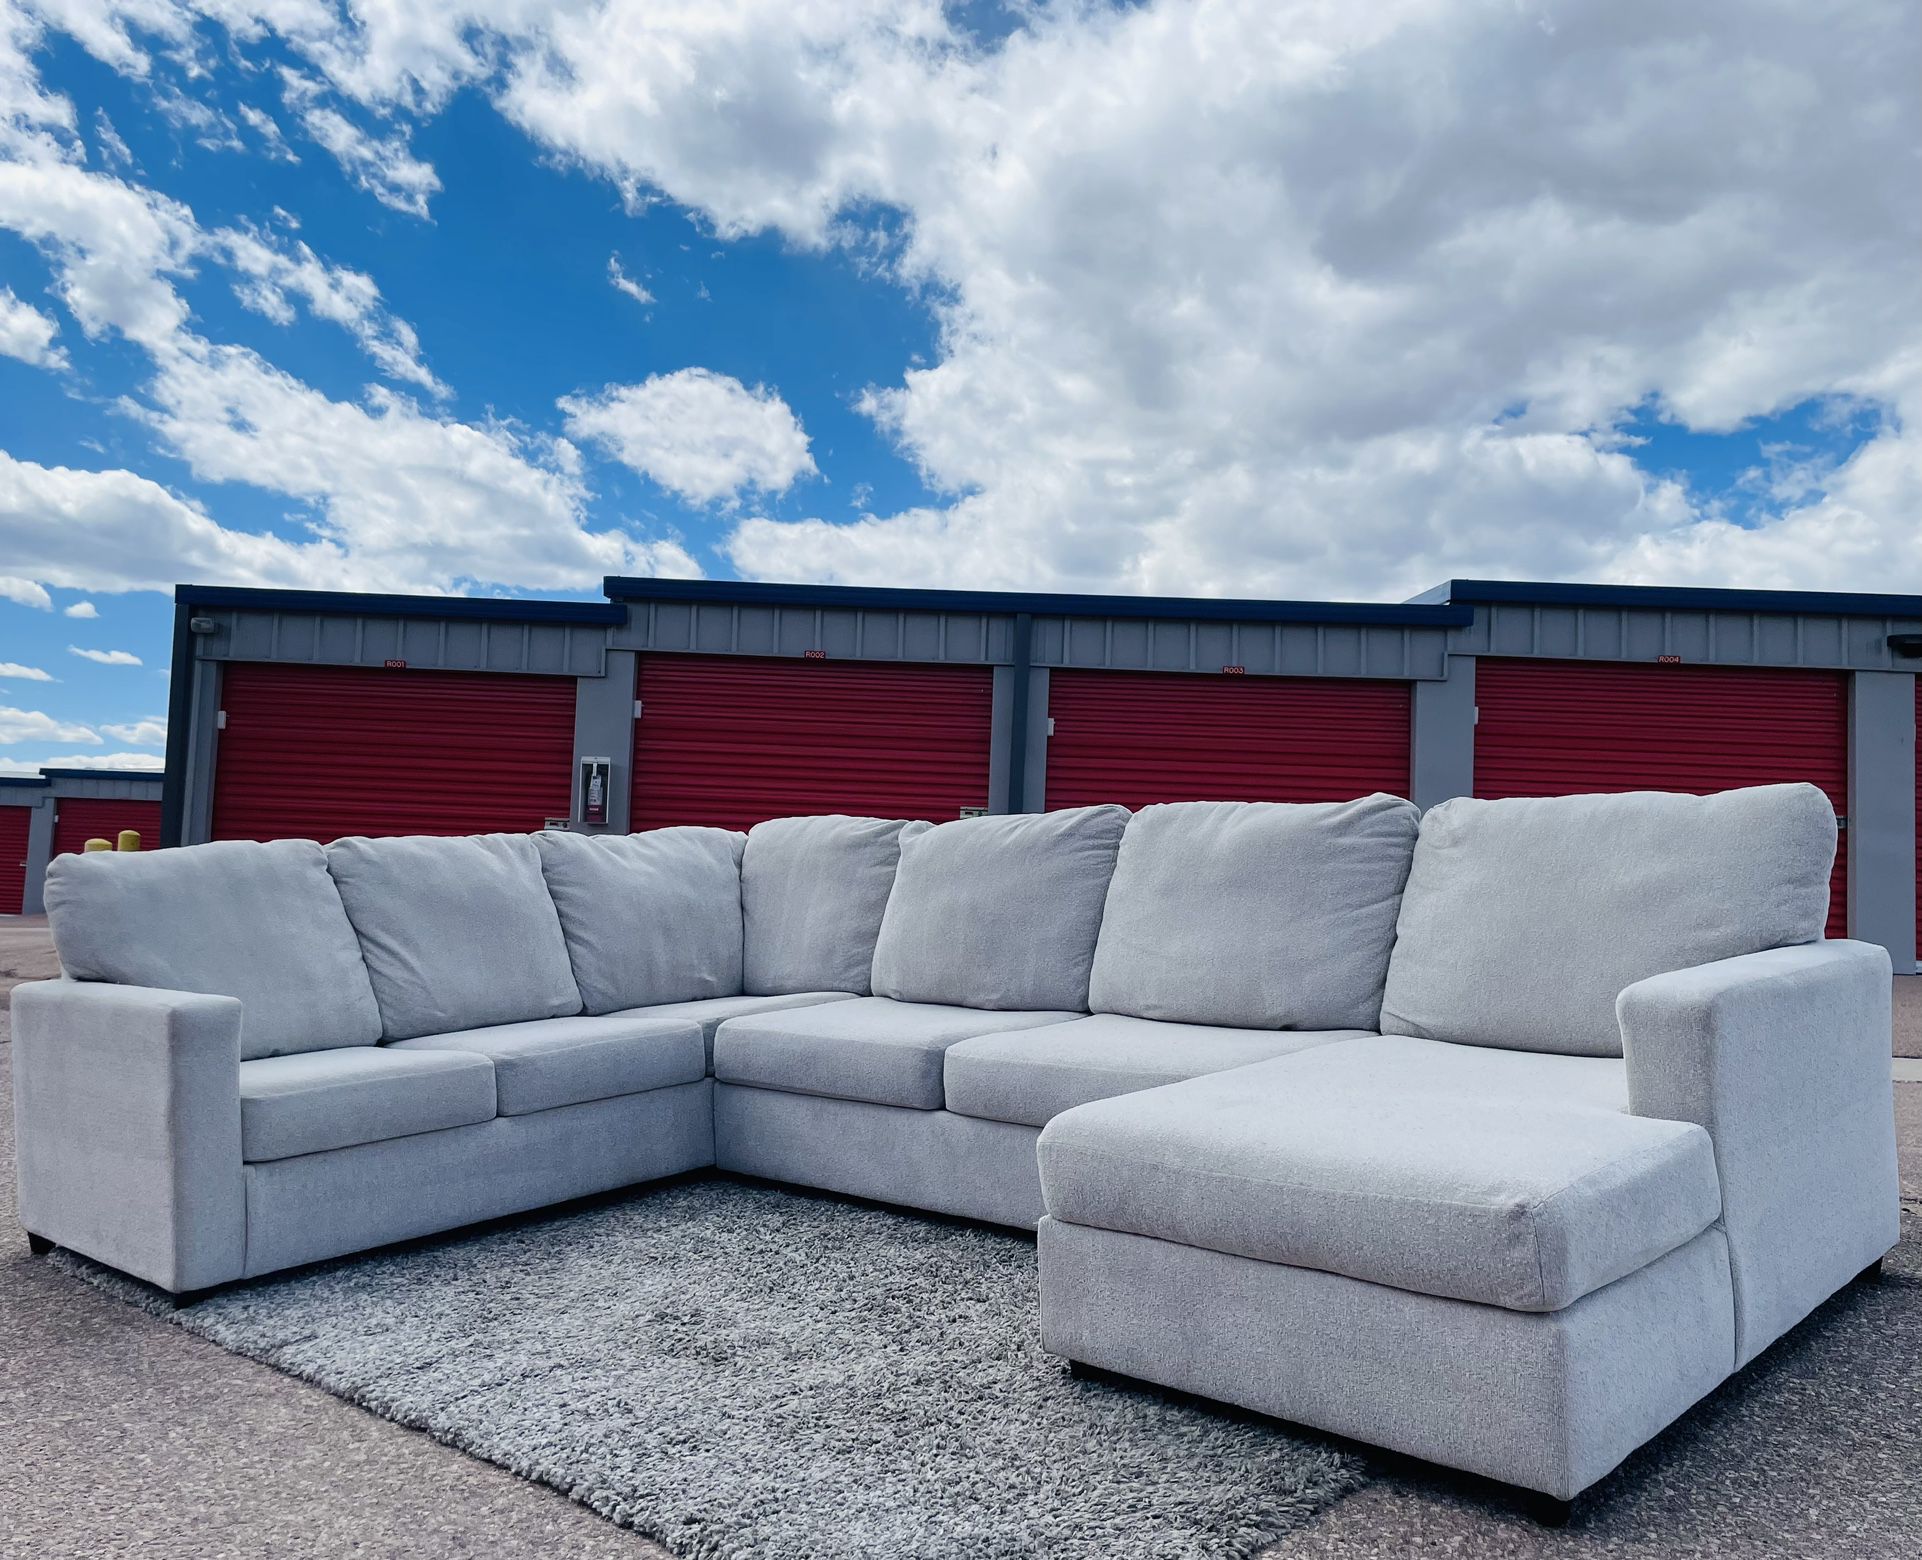 Comfy Ashley Sectional W/ Chaise Lounge *FREE LOCAL DELIVERY*